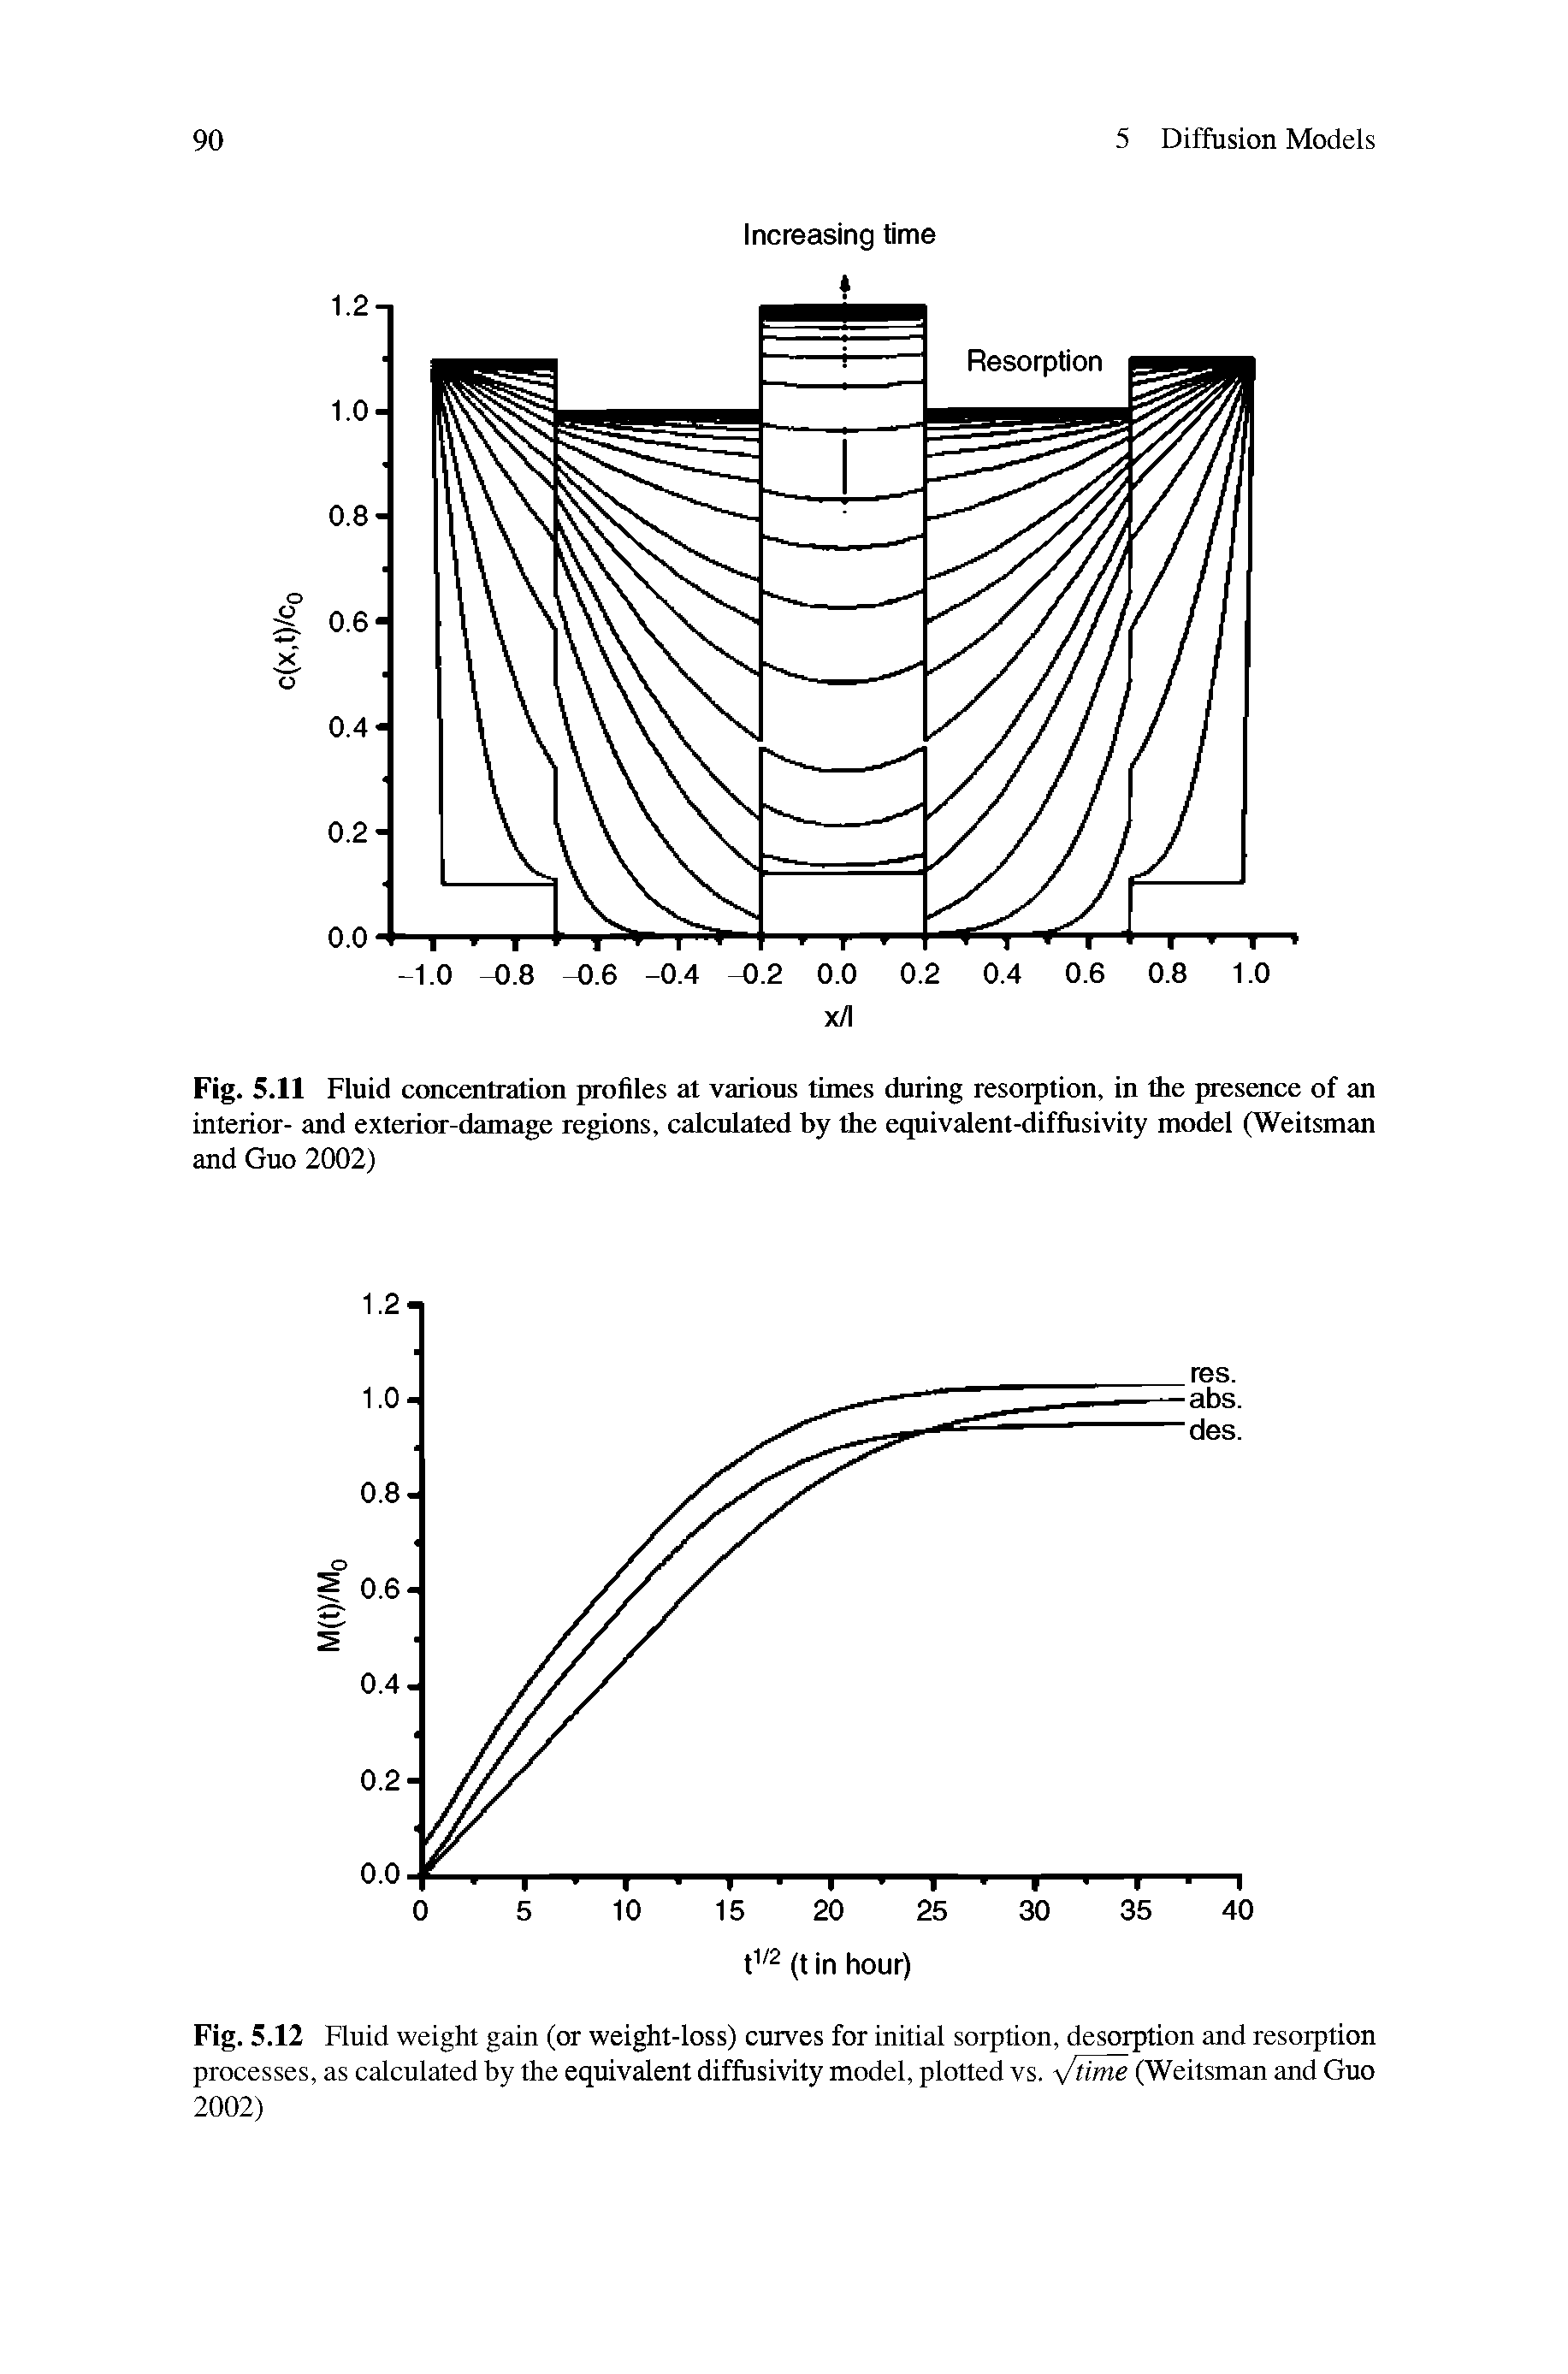 Fig. 5.12 Fluid weight gain (or weight-loss) curves for initial sorption, desorption and resorption processes, as calculated by the equivalent diffusivity model, plotted vs. /time (Weitsman and Guo 2002)...